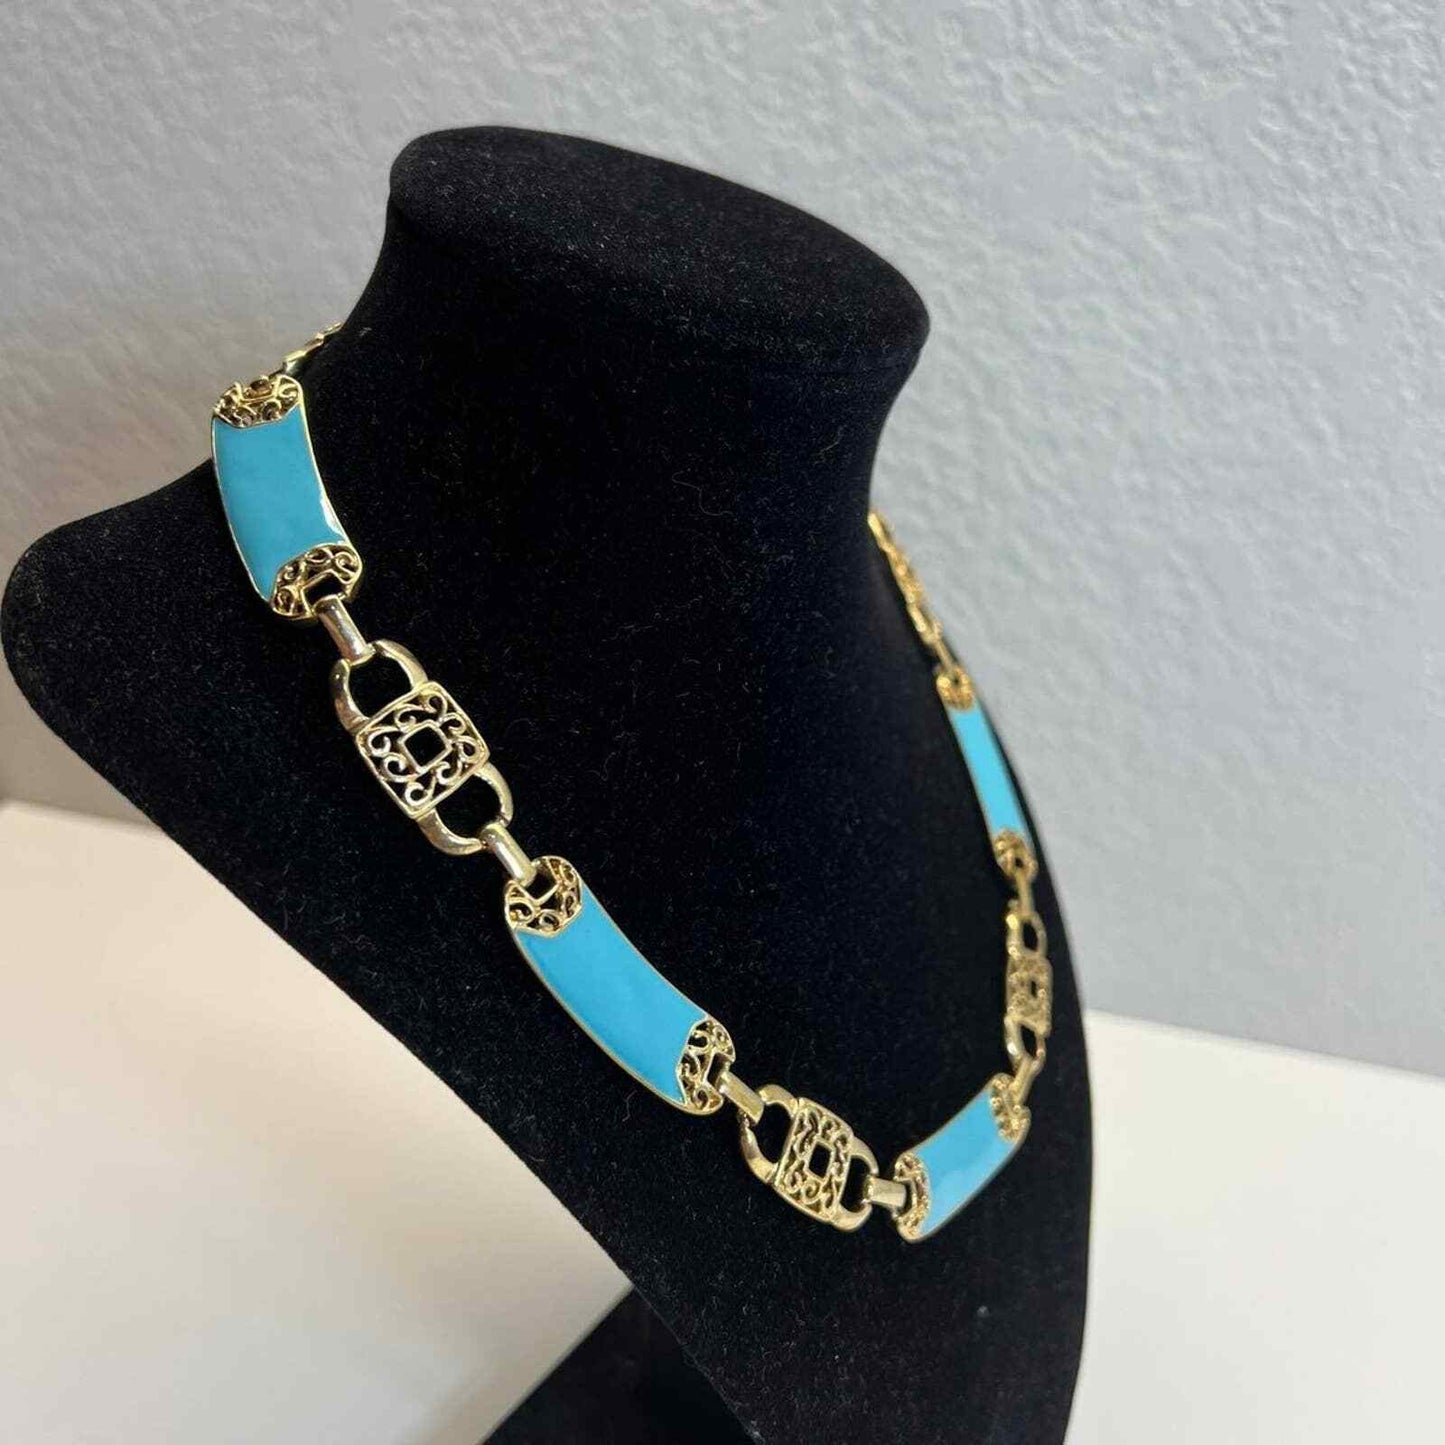 Necklace Turquoise Women's Jewelry Metal Silver Tone Settings Hangs Flat